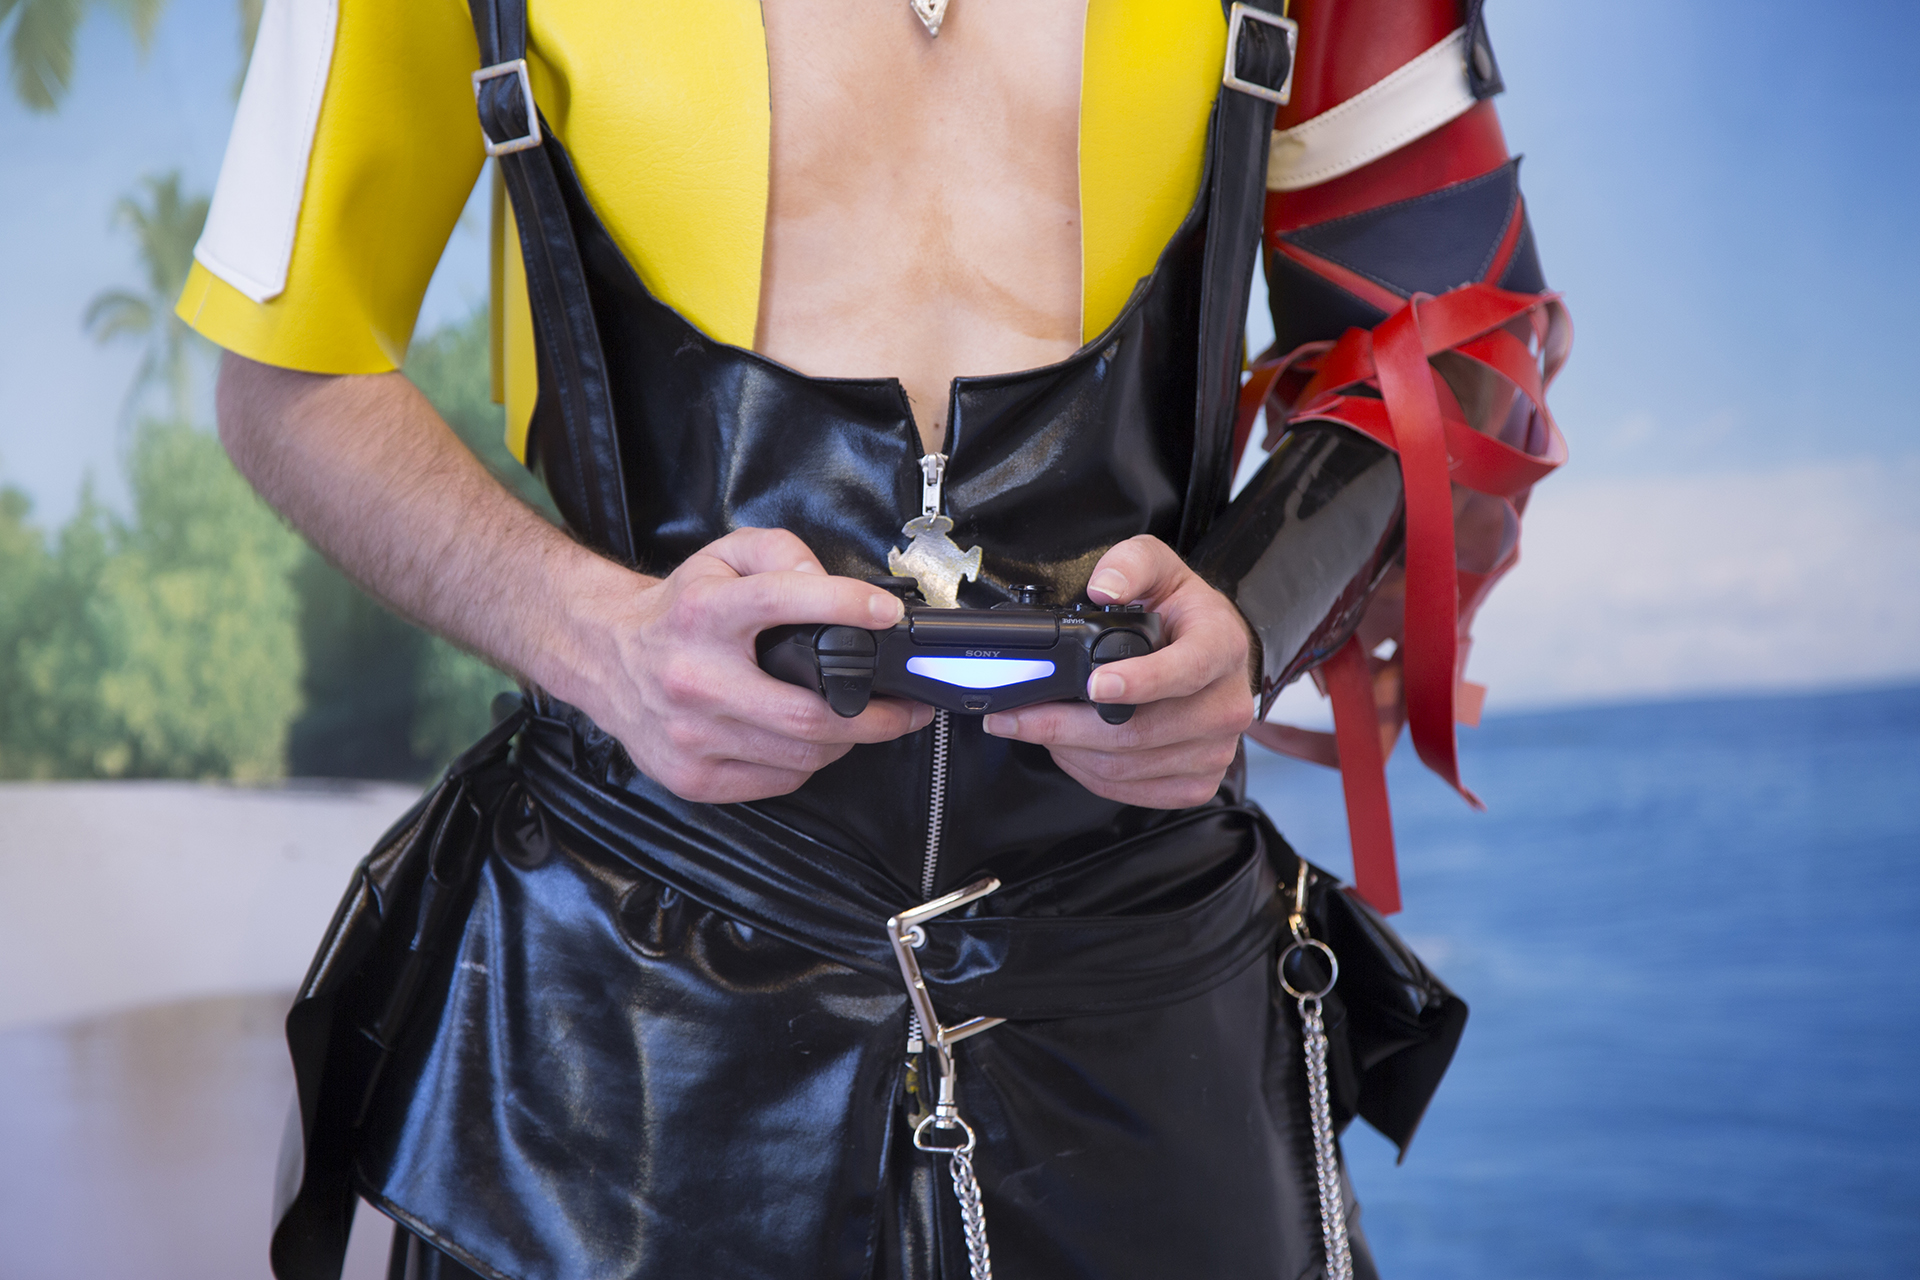 Detail of Jesse's hands with a cnotroller while dressed in cosplay playing video games on an artificial beach set